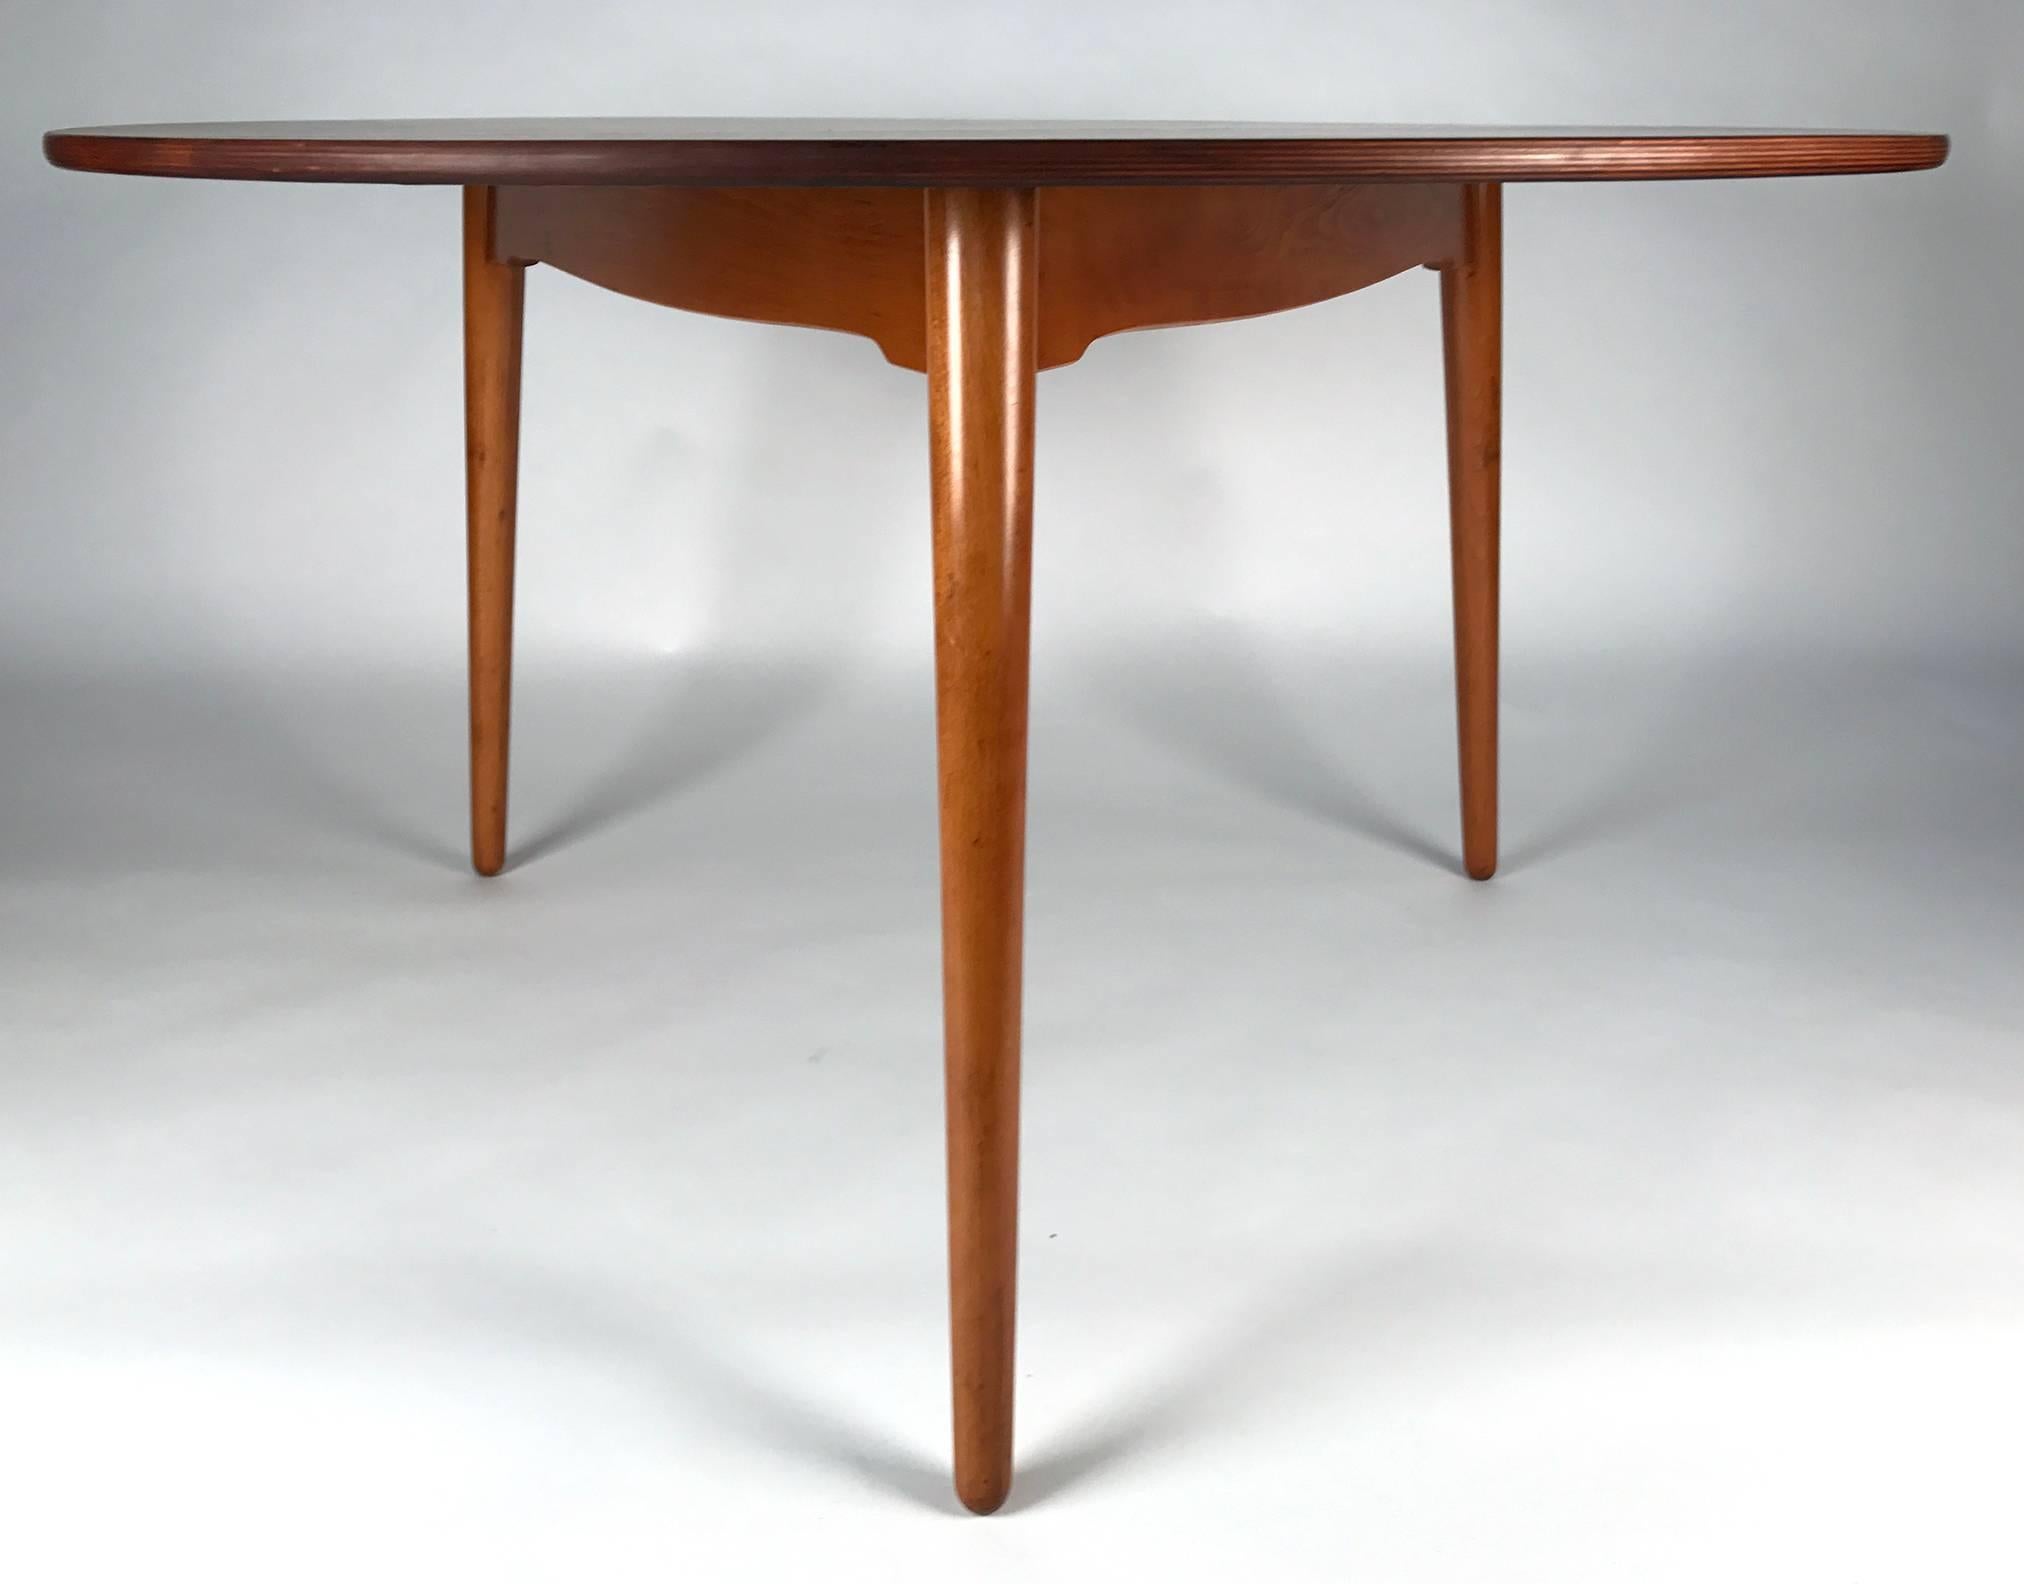 hans wegner table and chairs